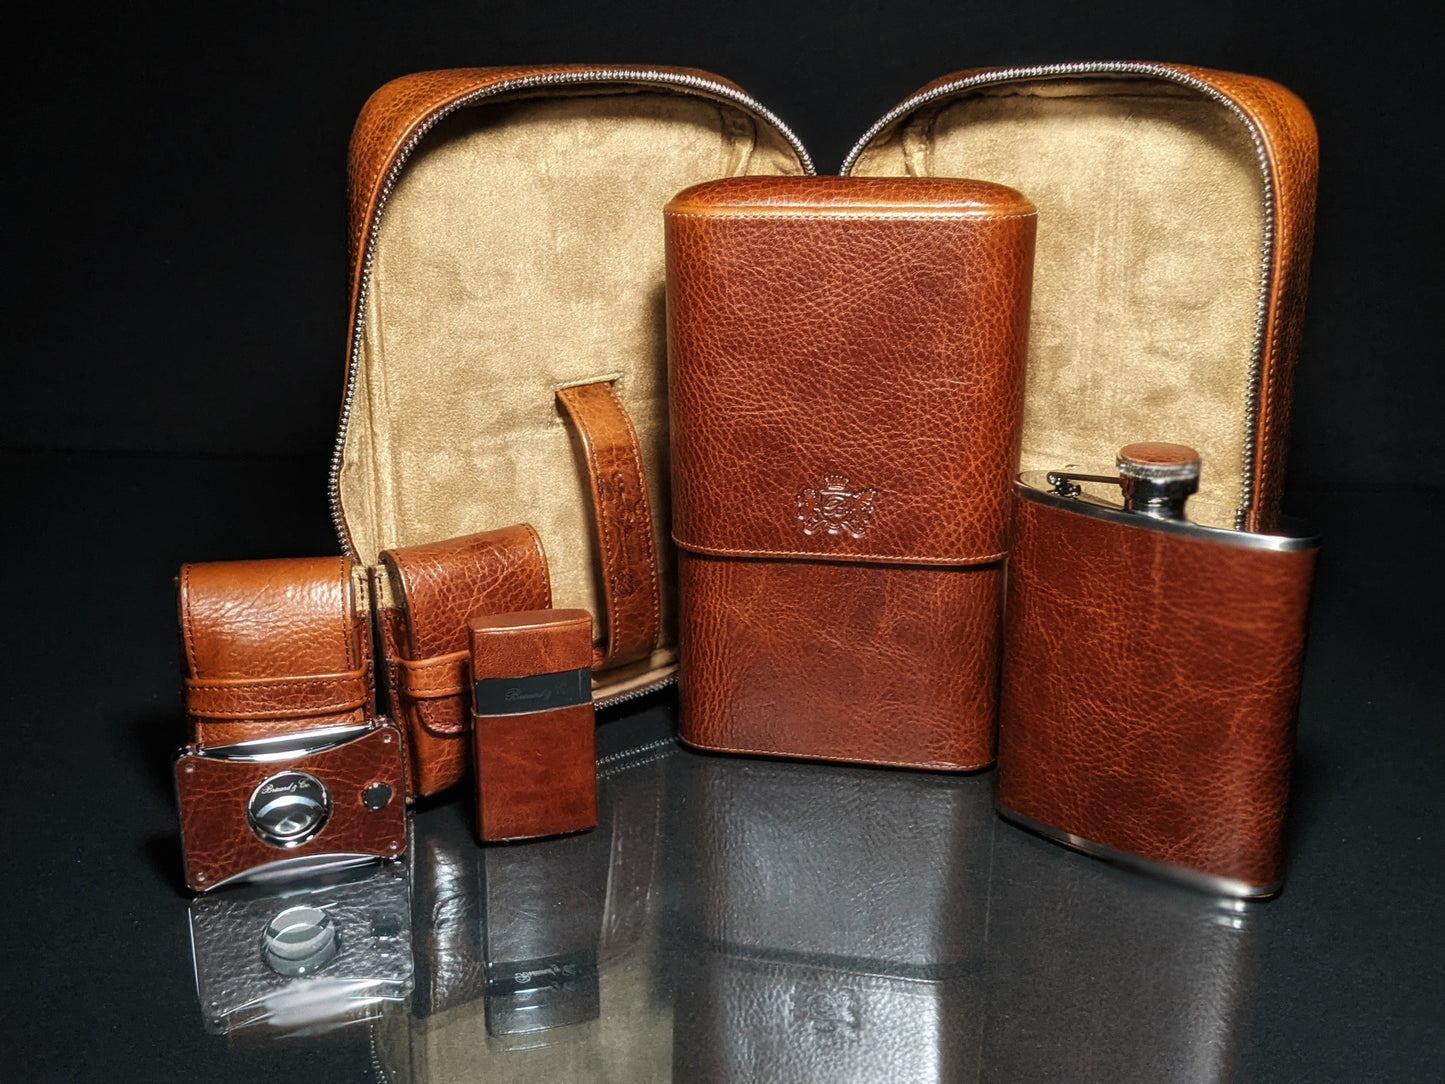 Brizard & Co. Havana Traveler - Antique Saddle Leather with cutter and lighter